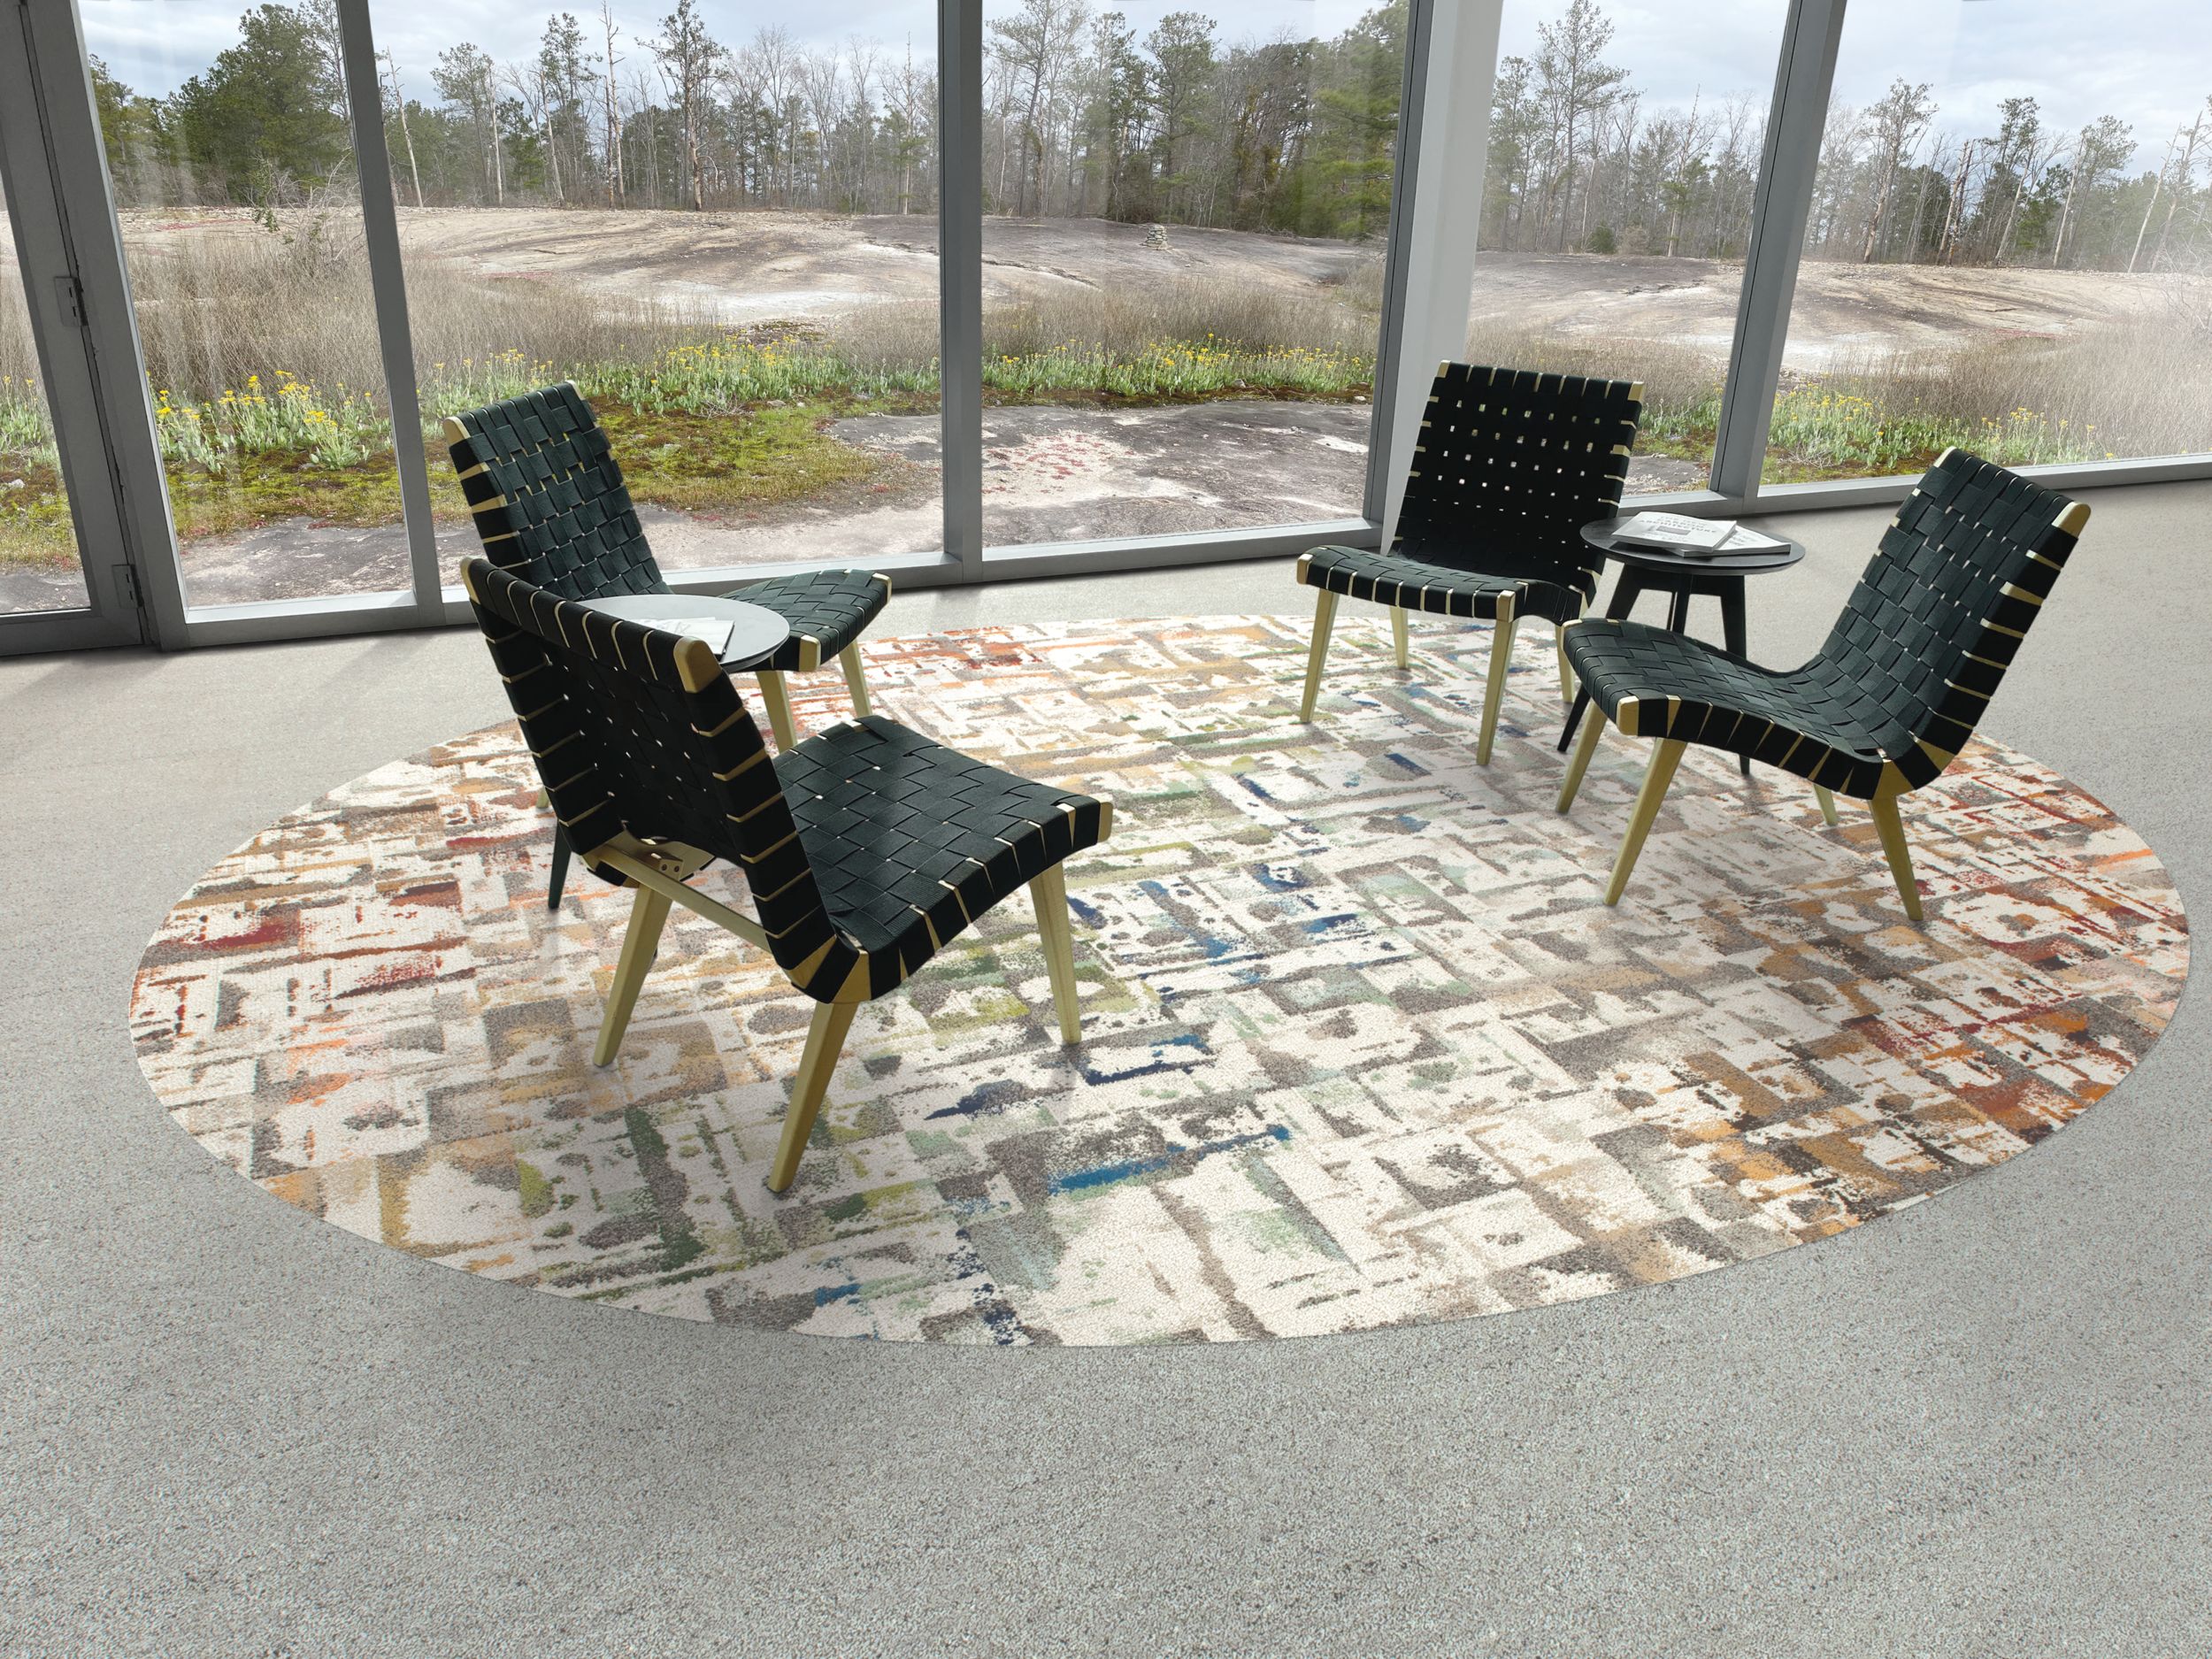 Interface Panola Mountain and Rockland Road carpet tile in glass-enclosed seating area with four chairs imagen número 10